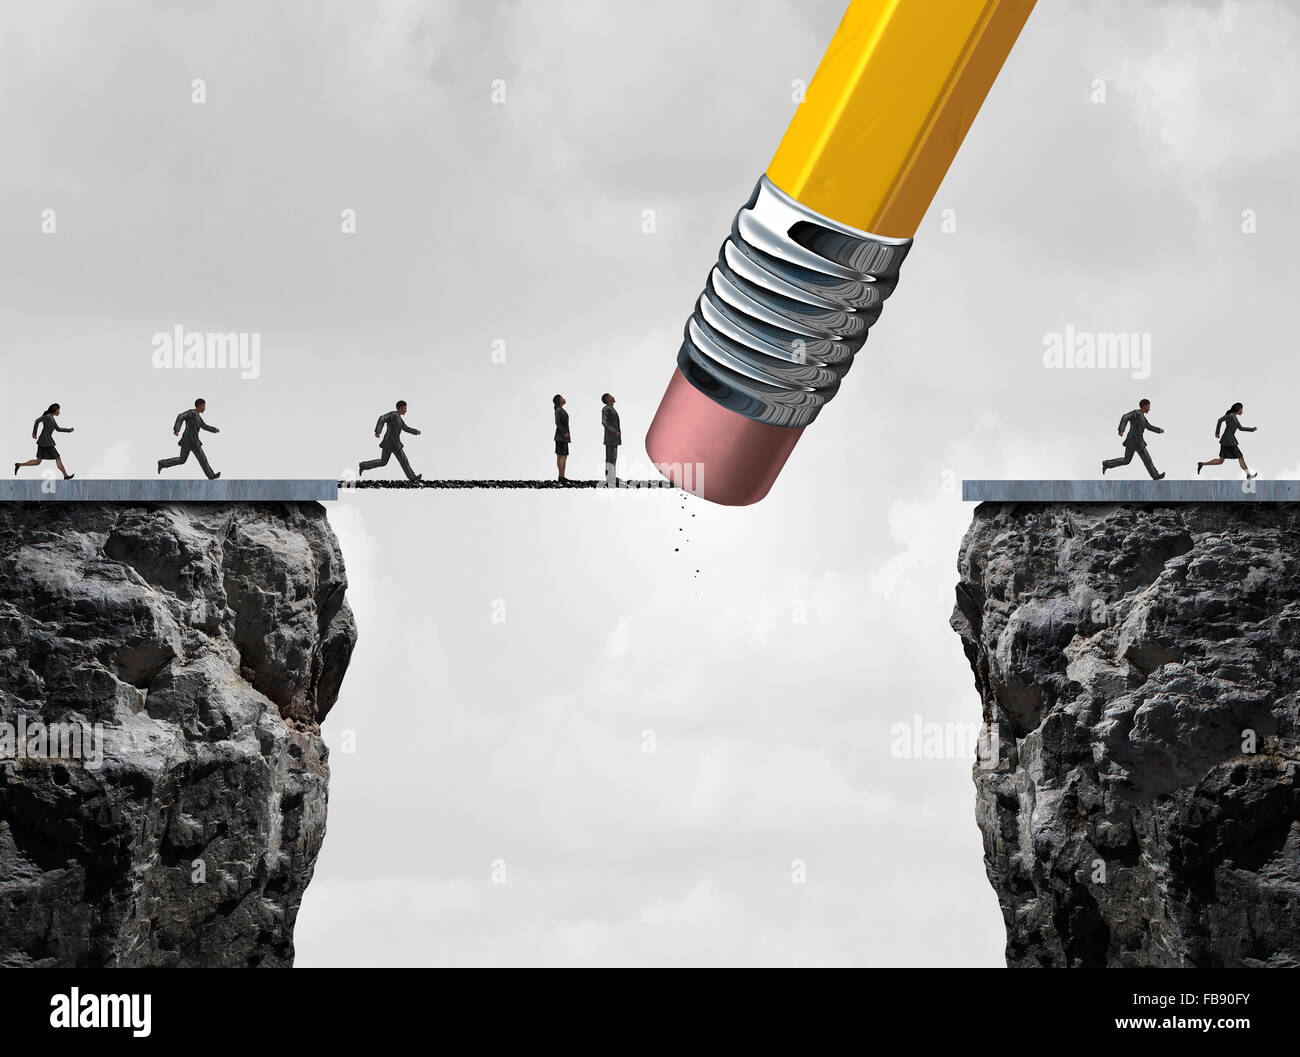 Missed opportunity concept and too late symbol as slow  and delayed businesspeople stuck on a bridge because an eraser erased the path with other quick employees continuing the race over the cliff as a business metaphor. Stock Photo